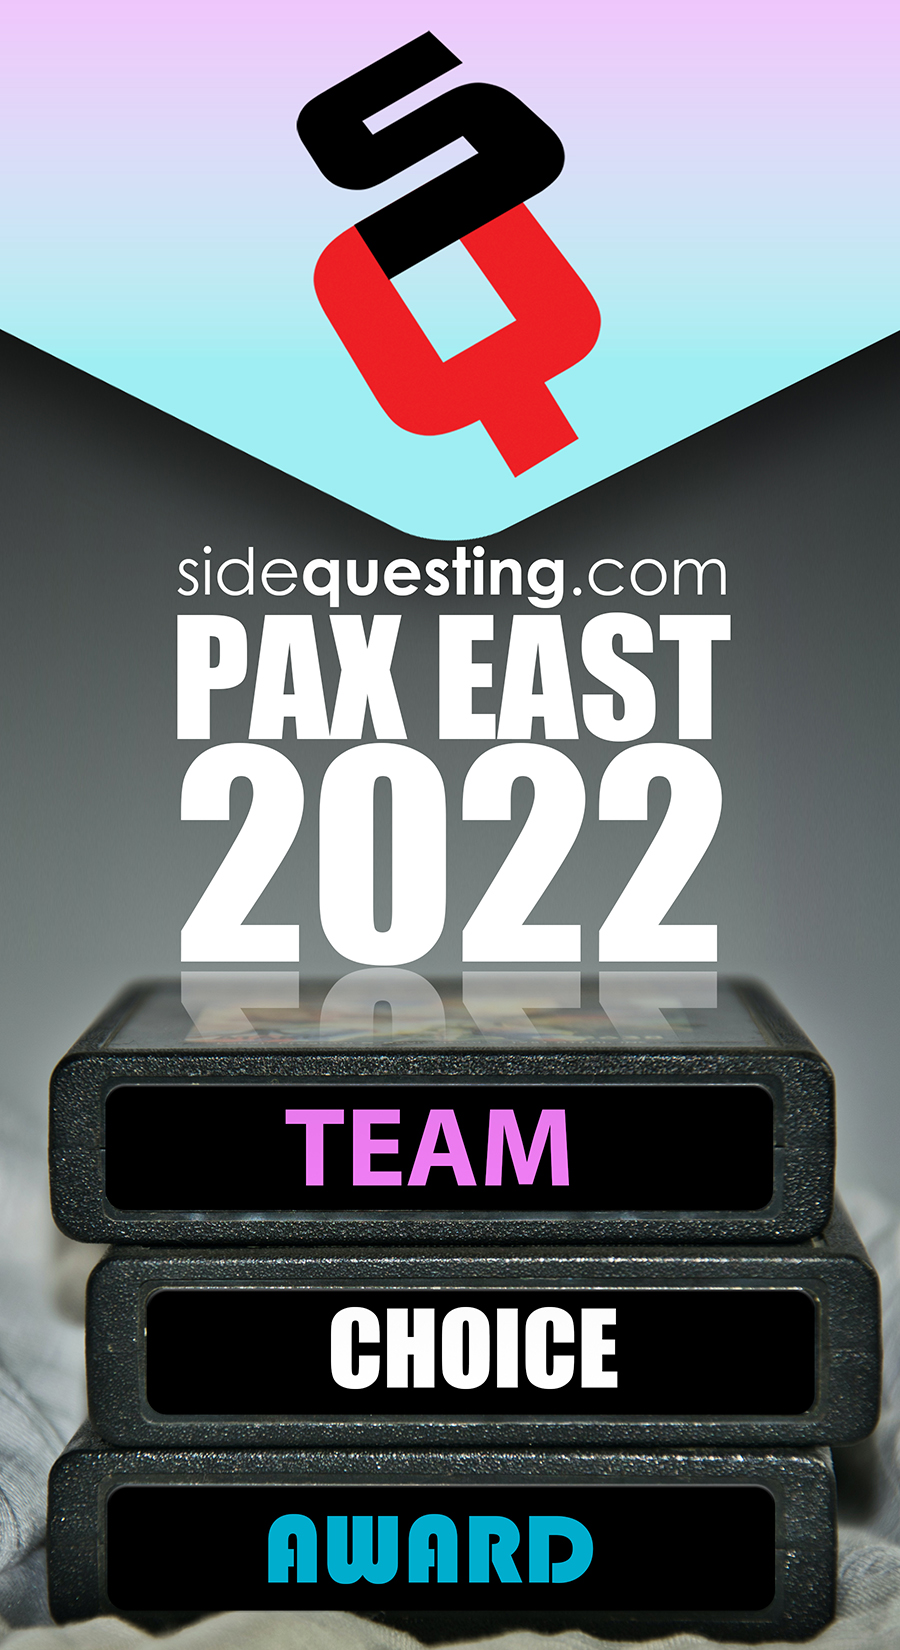 SideQuesting reveals its PAX East 2022 Team Choice Awards